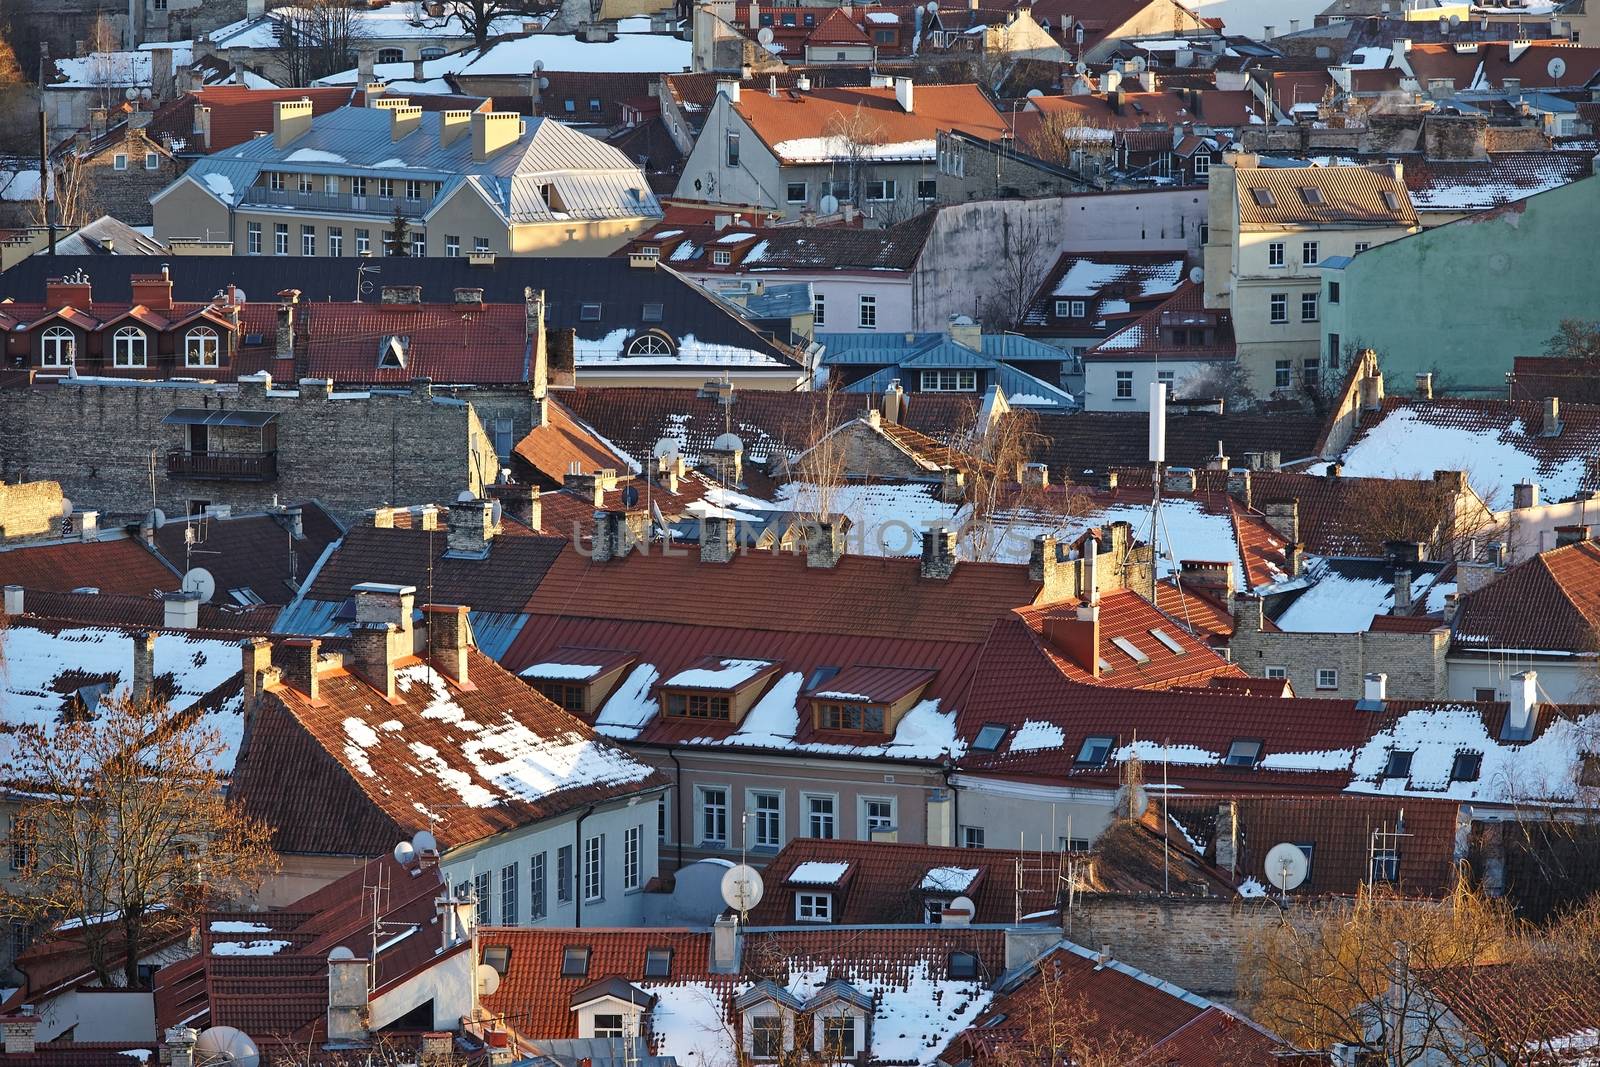 Roofs of old houses in a town